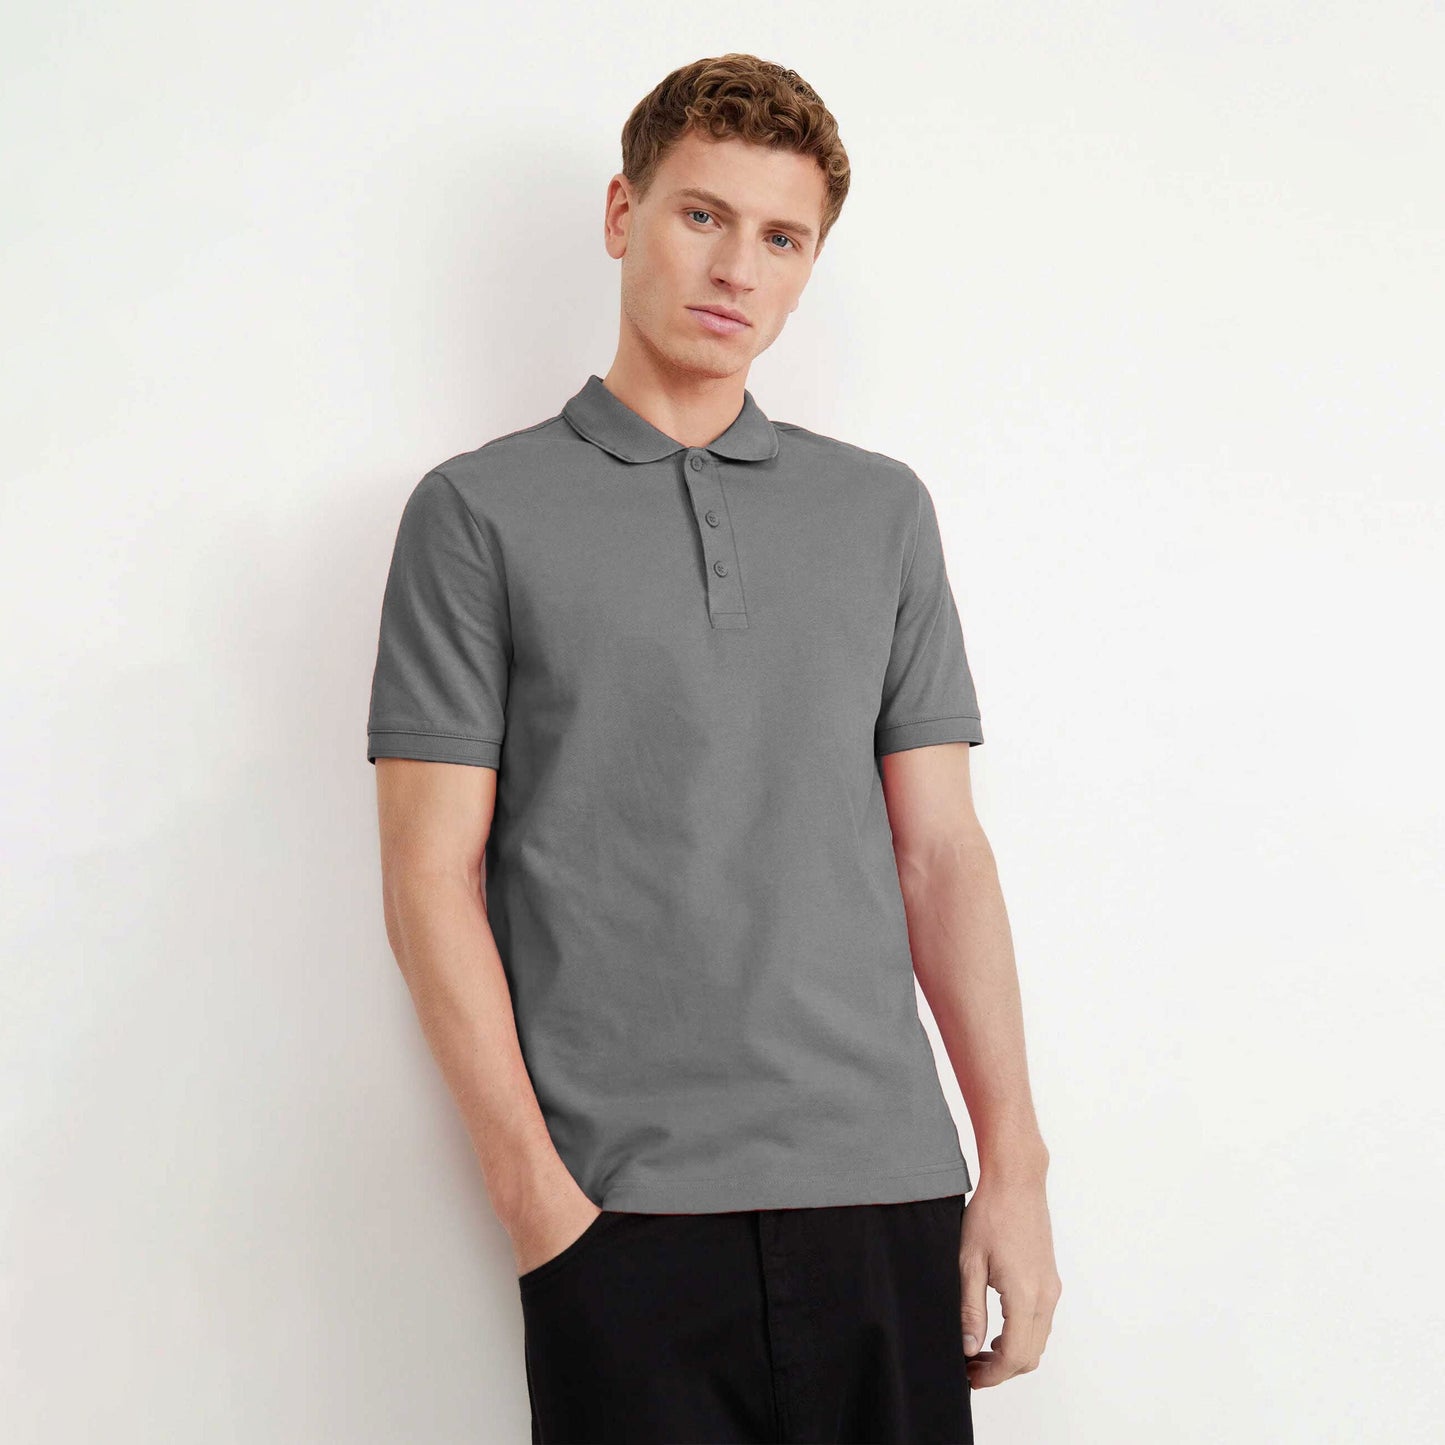 Platic Men's Short Sleeve with Minor Fault Polo Shirt